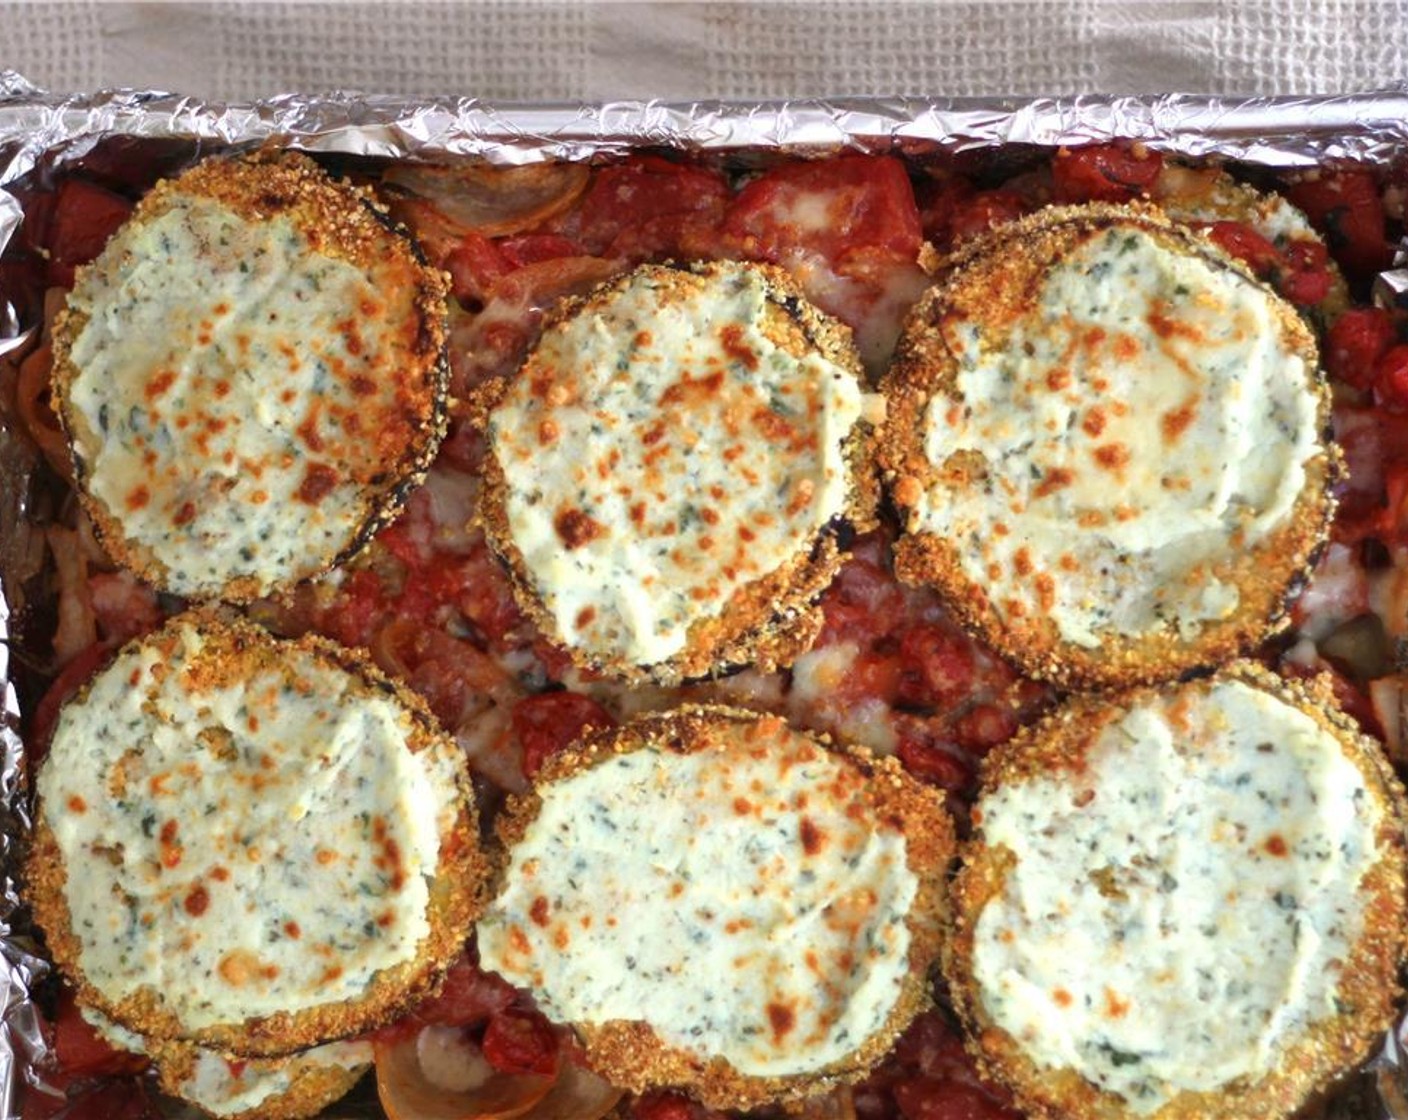 step 10 Repeat the layers of eggsplant, tomatoes, and Parmesan, finishing with just a layer of eggplant and Parmesan on top. Cover and bake for 20 minutes, and then uncover and bake until golden brown on top.